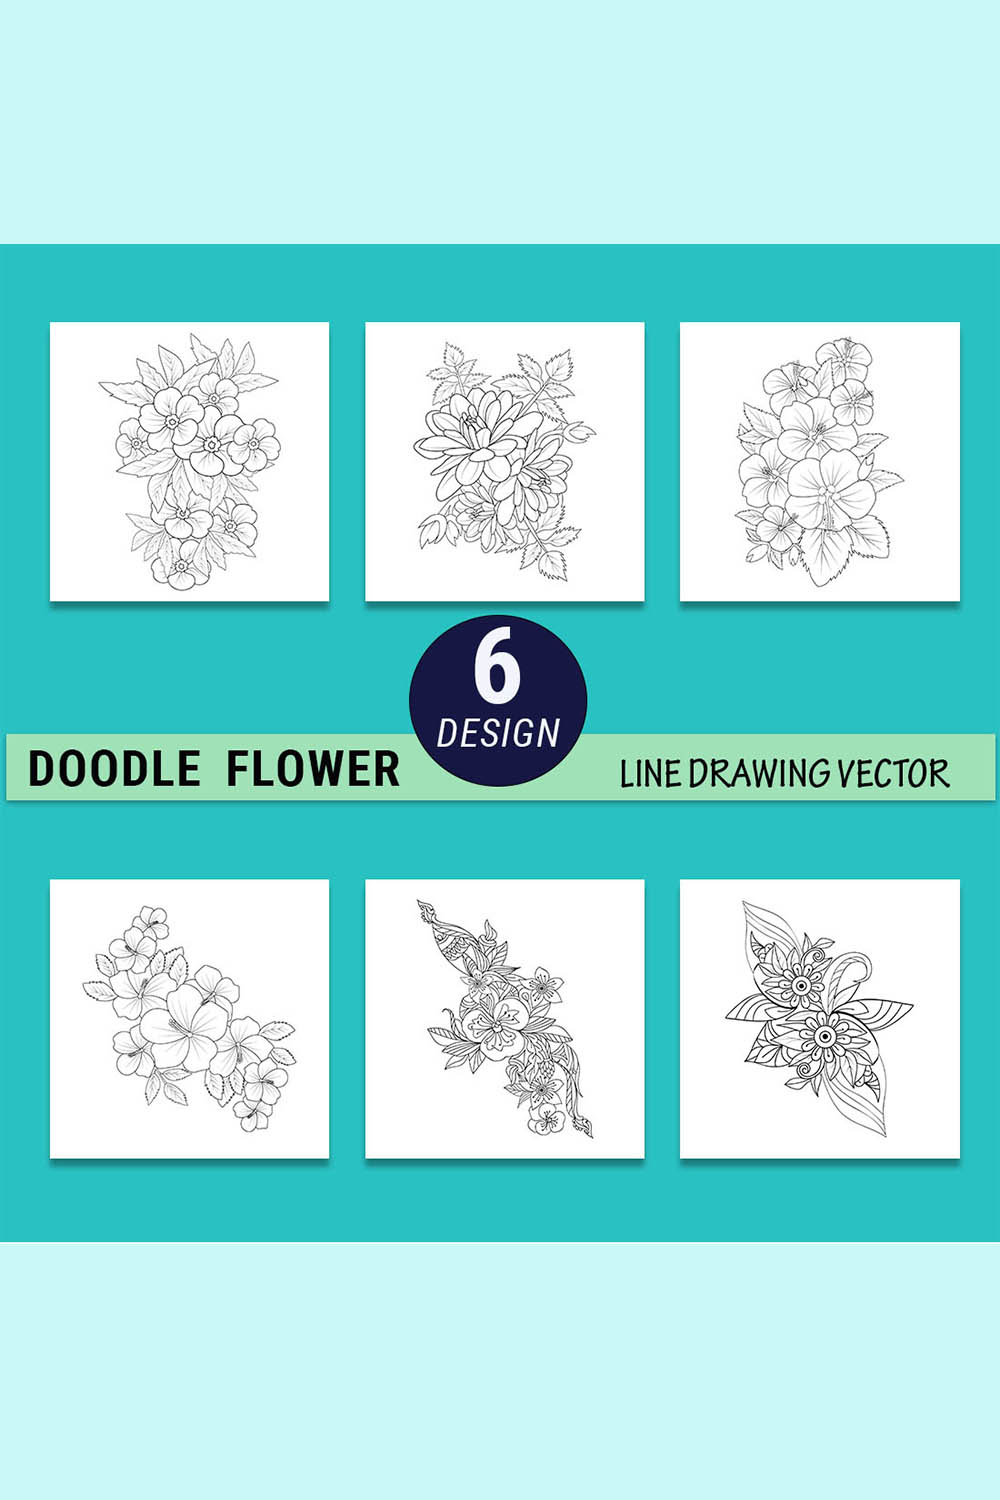 zentangle art tattoos, easy flower doodle illustration, doodle flower drawing, simple bouquet doodle flower drawing, flower doodle art, simple doodle illustrations, catharanthus roseus sadabahar drawing, periwinkle tattoo designs, minimalist periwinkle tattoos, simple periwinkle flower tattoo pinterest preview image.